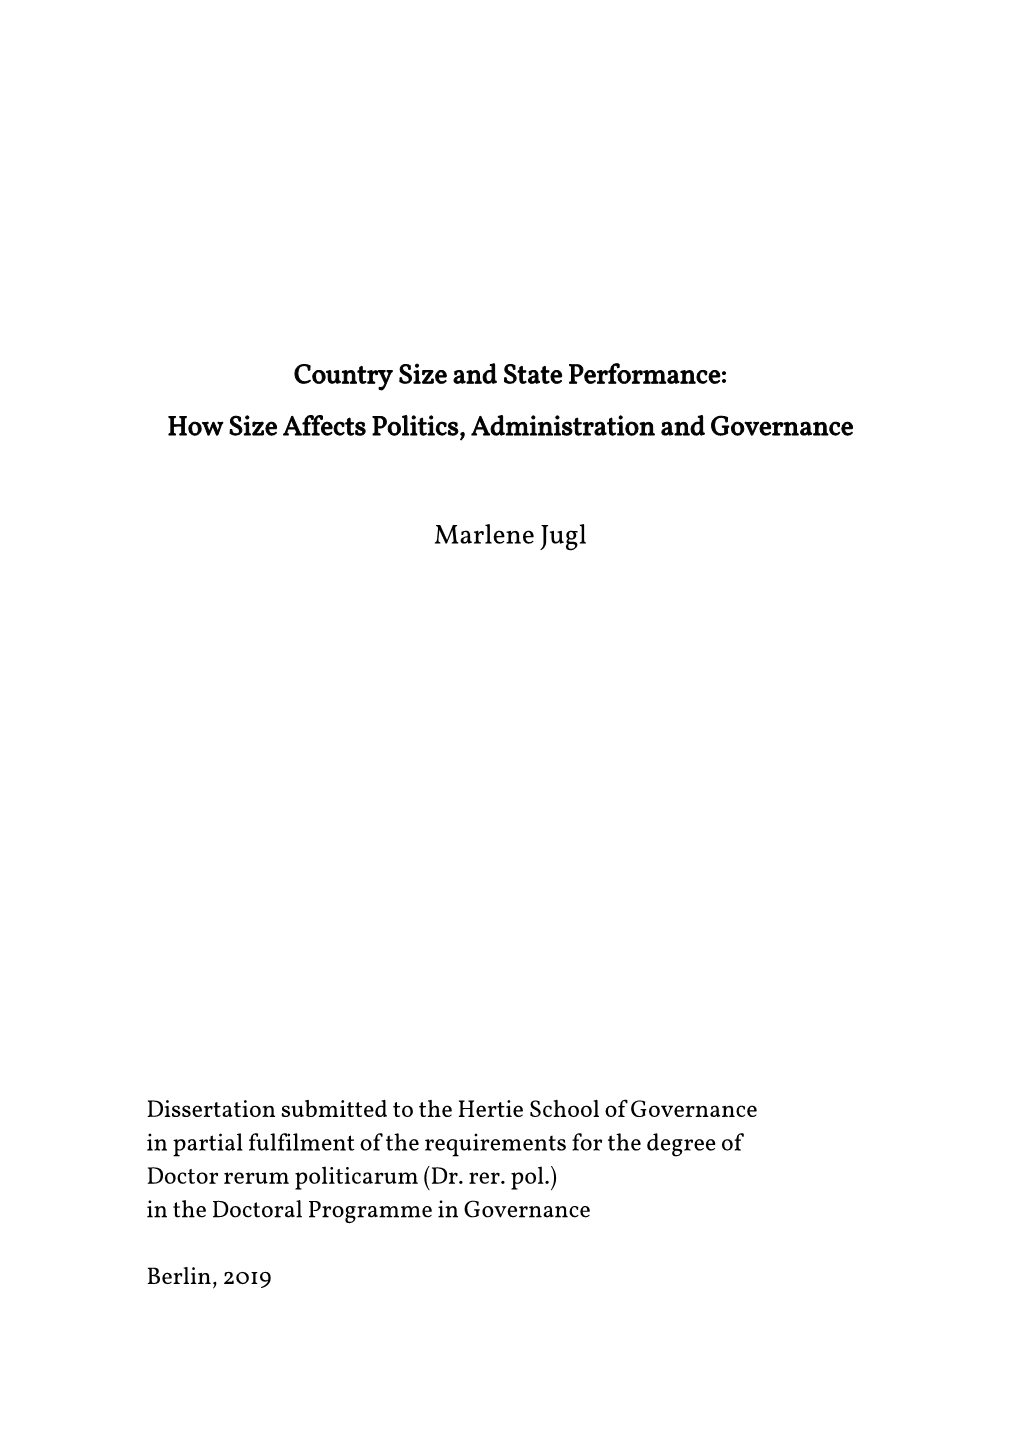 Country Size and State Performance: How Size Affects Politics, Administration and Governance Marlene Jugl